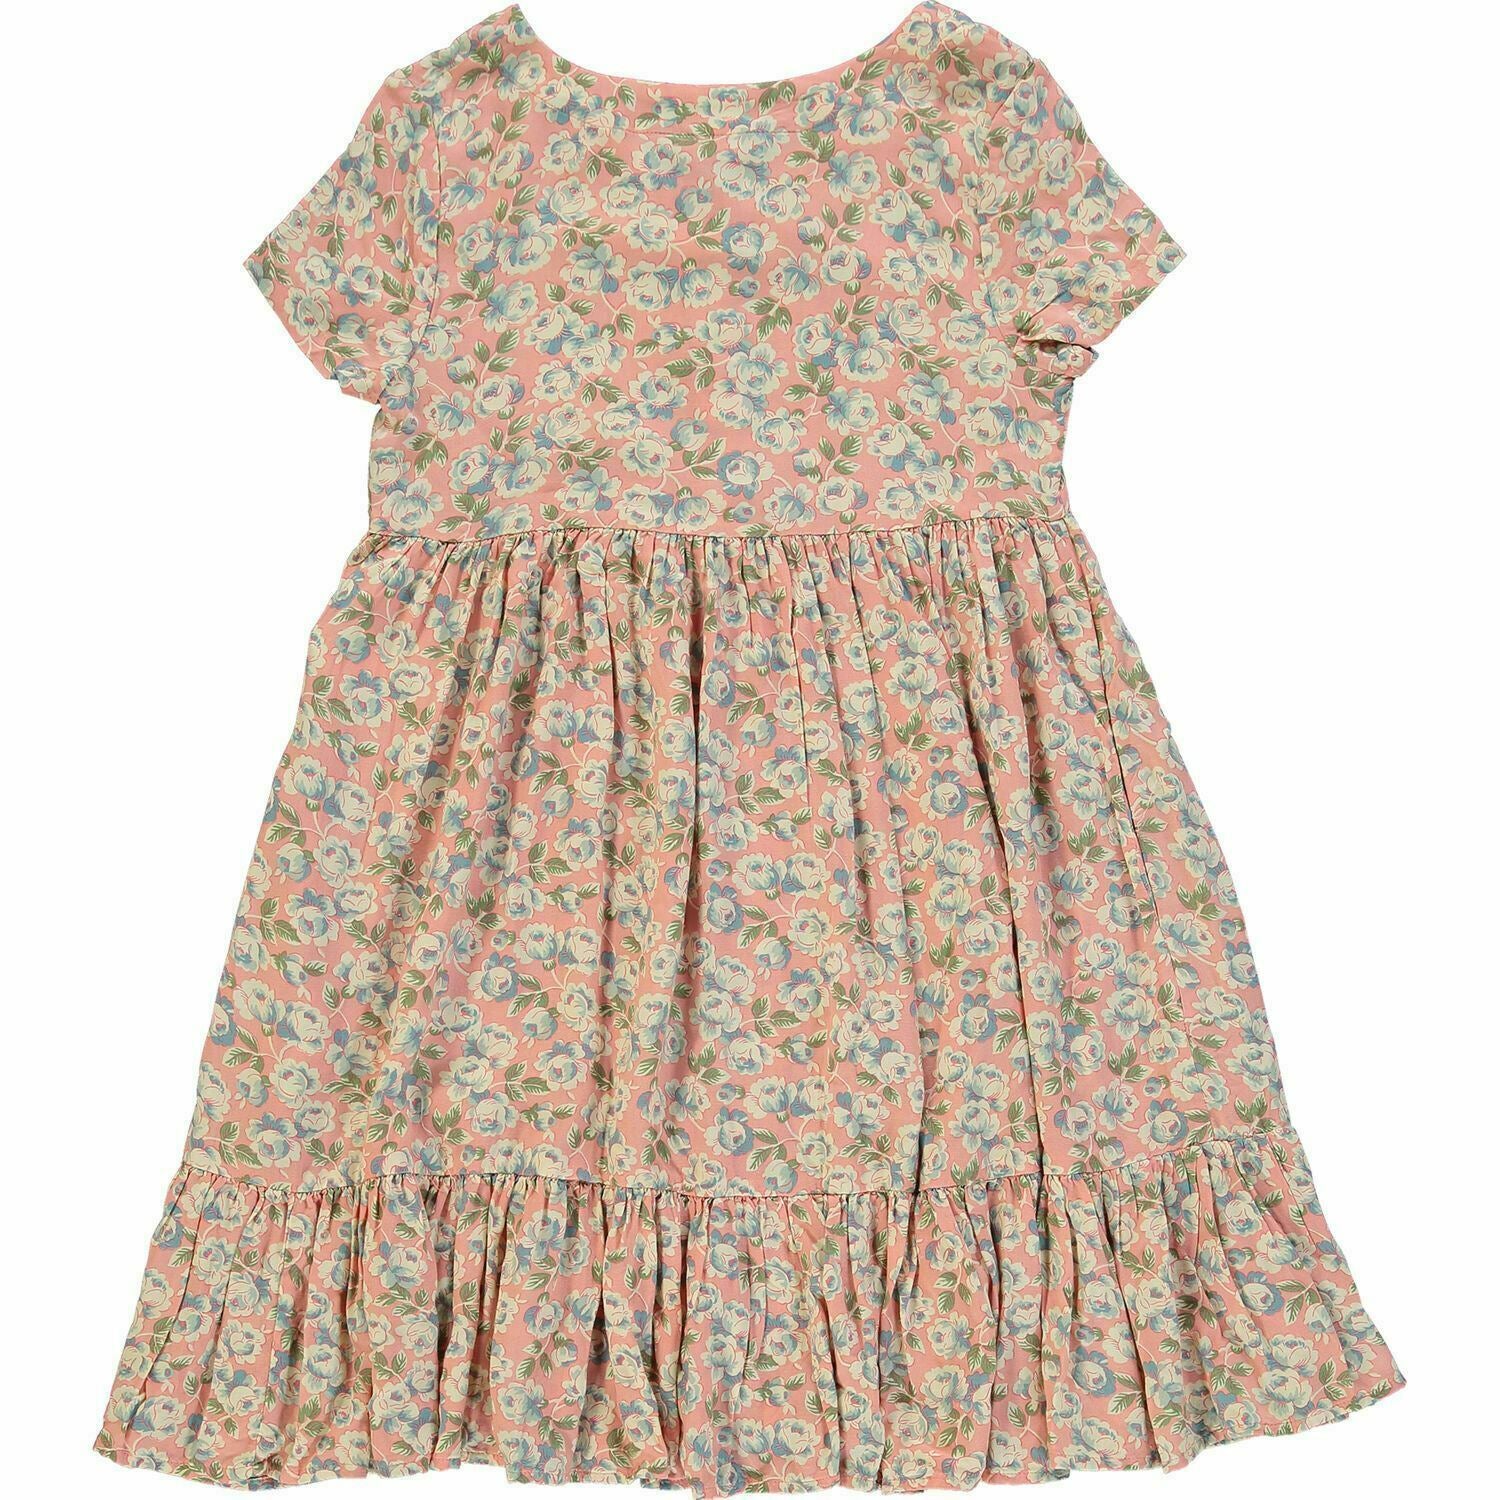 POLO RALPH LAUREN Girls' Rose Pink & Floral Day Dress, size 10 years